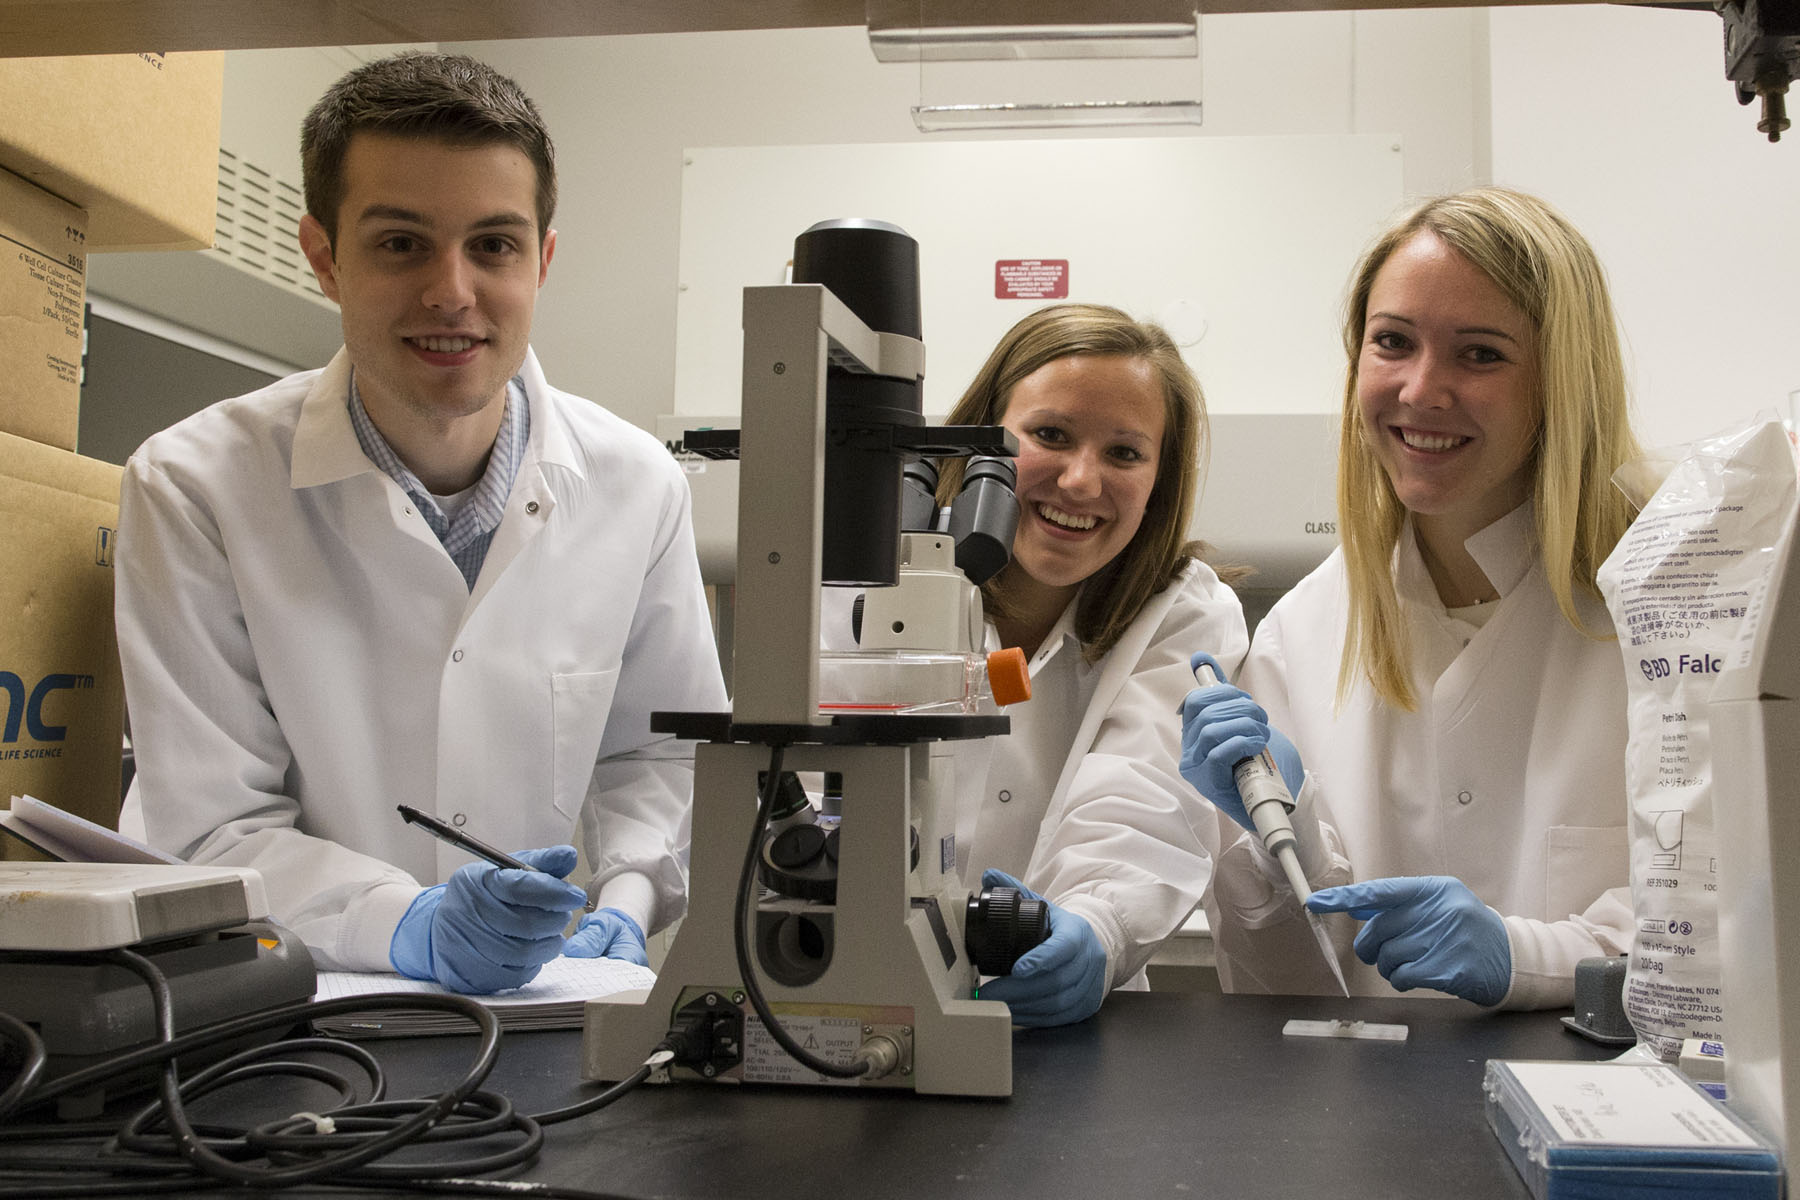 Tyler Brobst, Jessica Ungerleider and Alyssa Long stand together in the lab